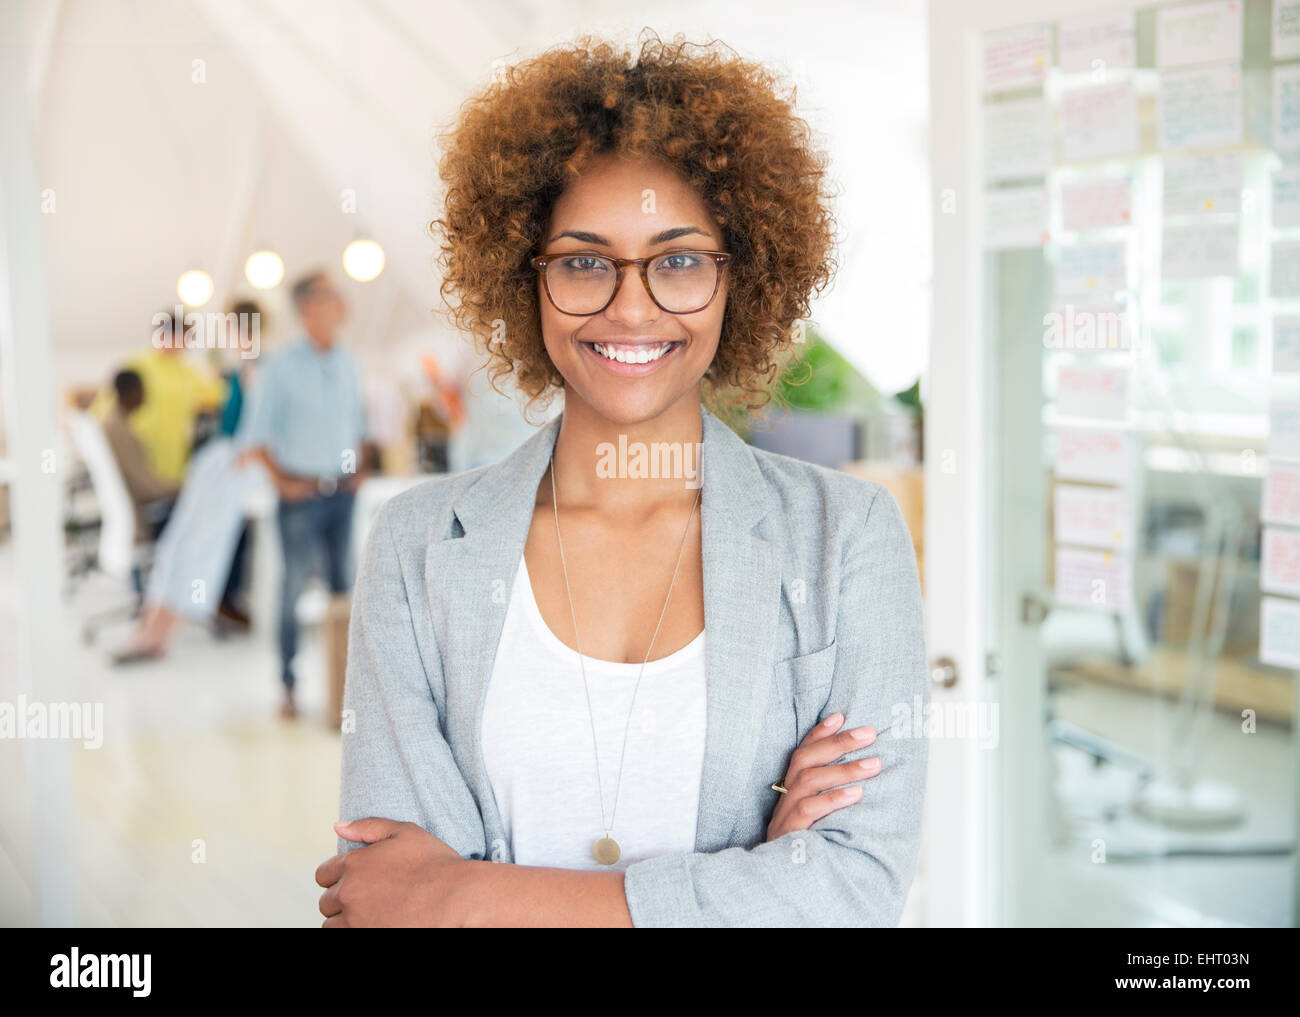 Portrait of smiling office worker with crossed arms Banque D'Images